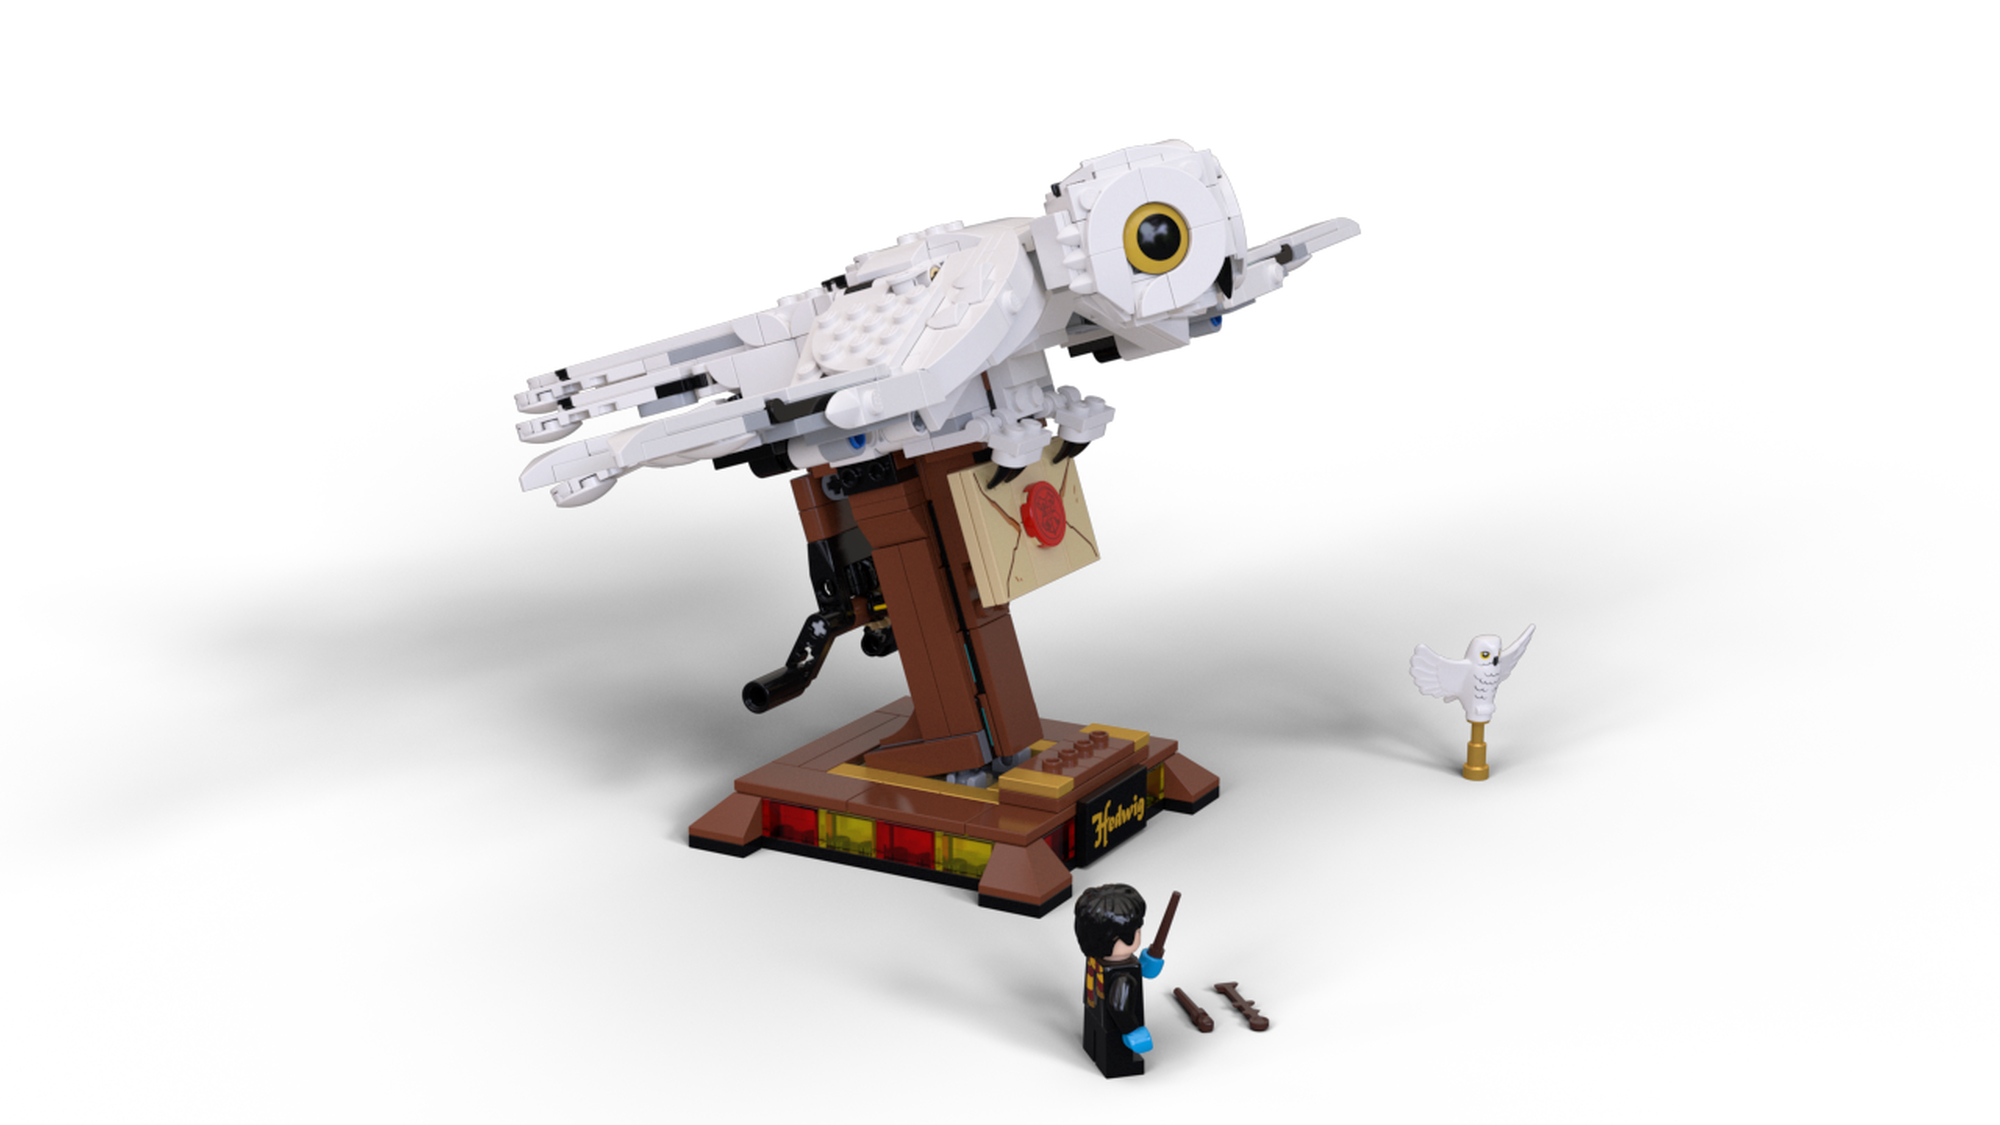 Lego 75979 Harry Potter Hedwig The Owl Figure Collectible Display Model  with Moving Wings